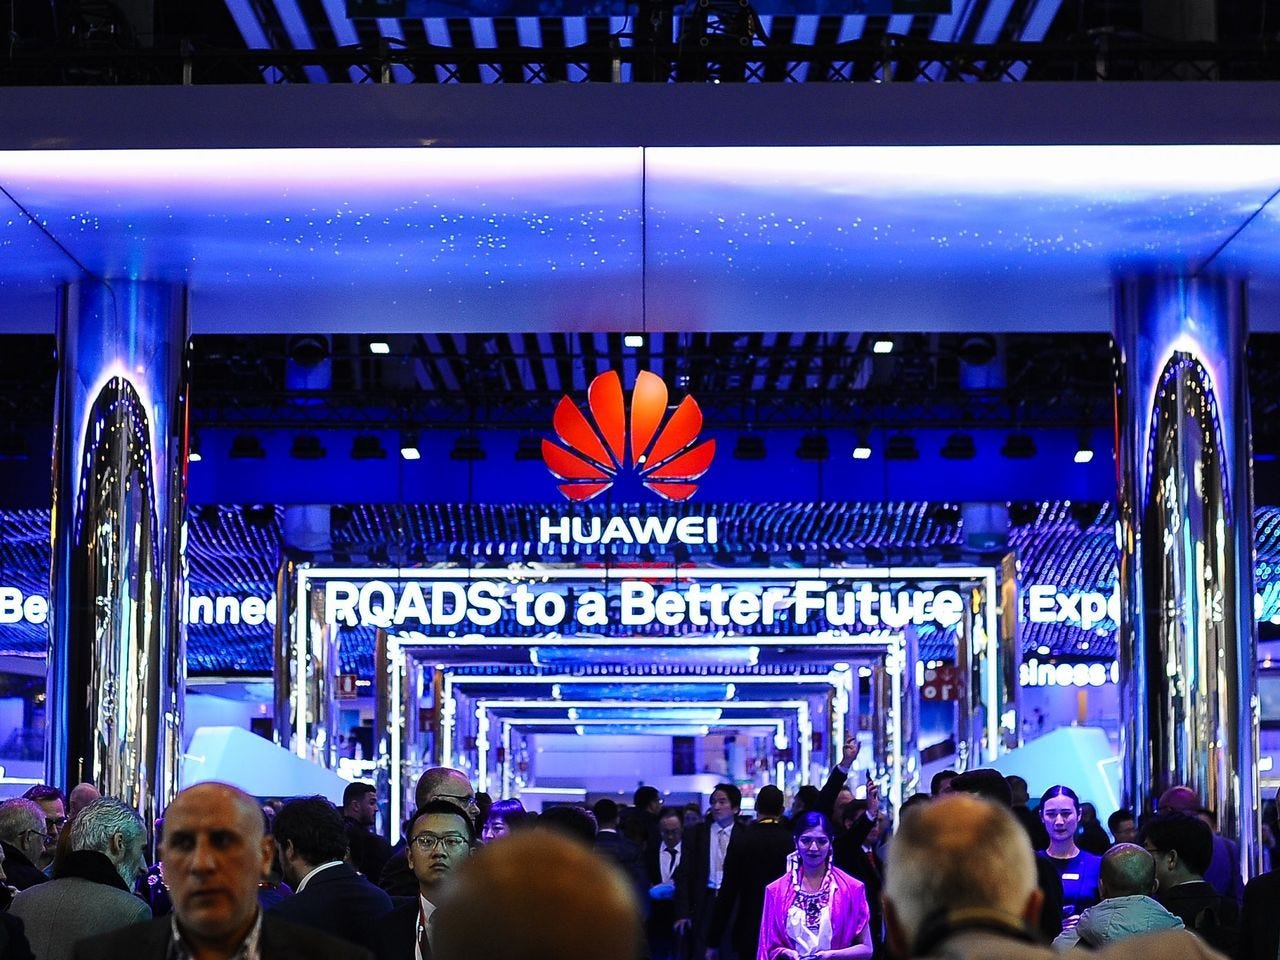 U.S. Says Huawei Is a Security Threat, So It's Backing Off - WSJ